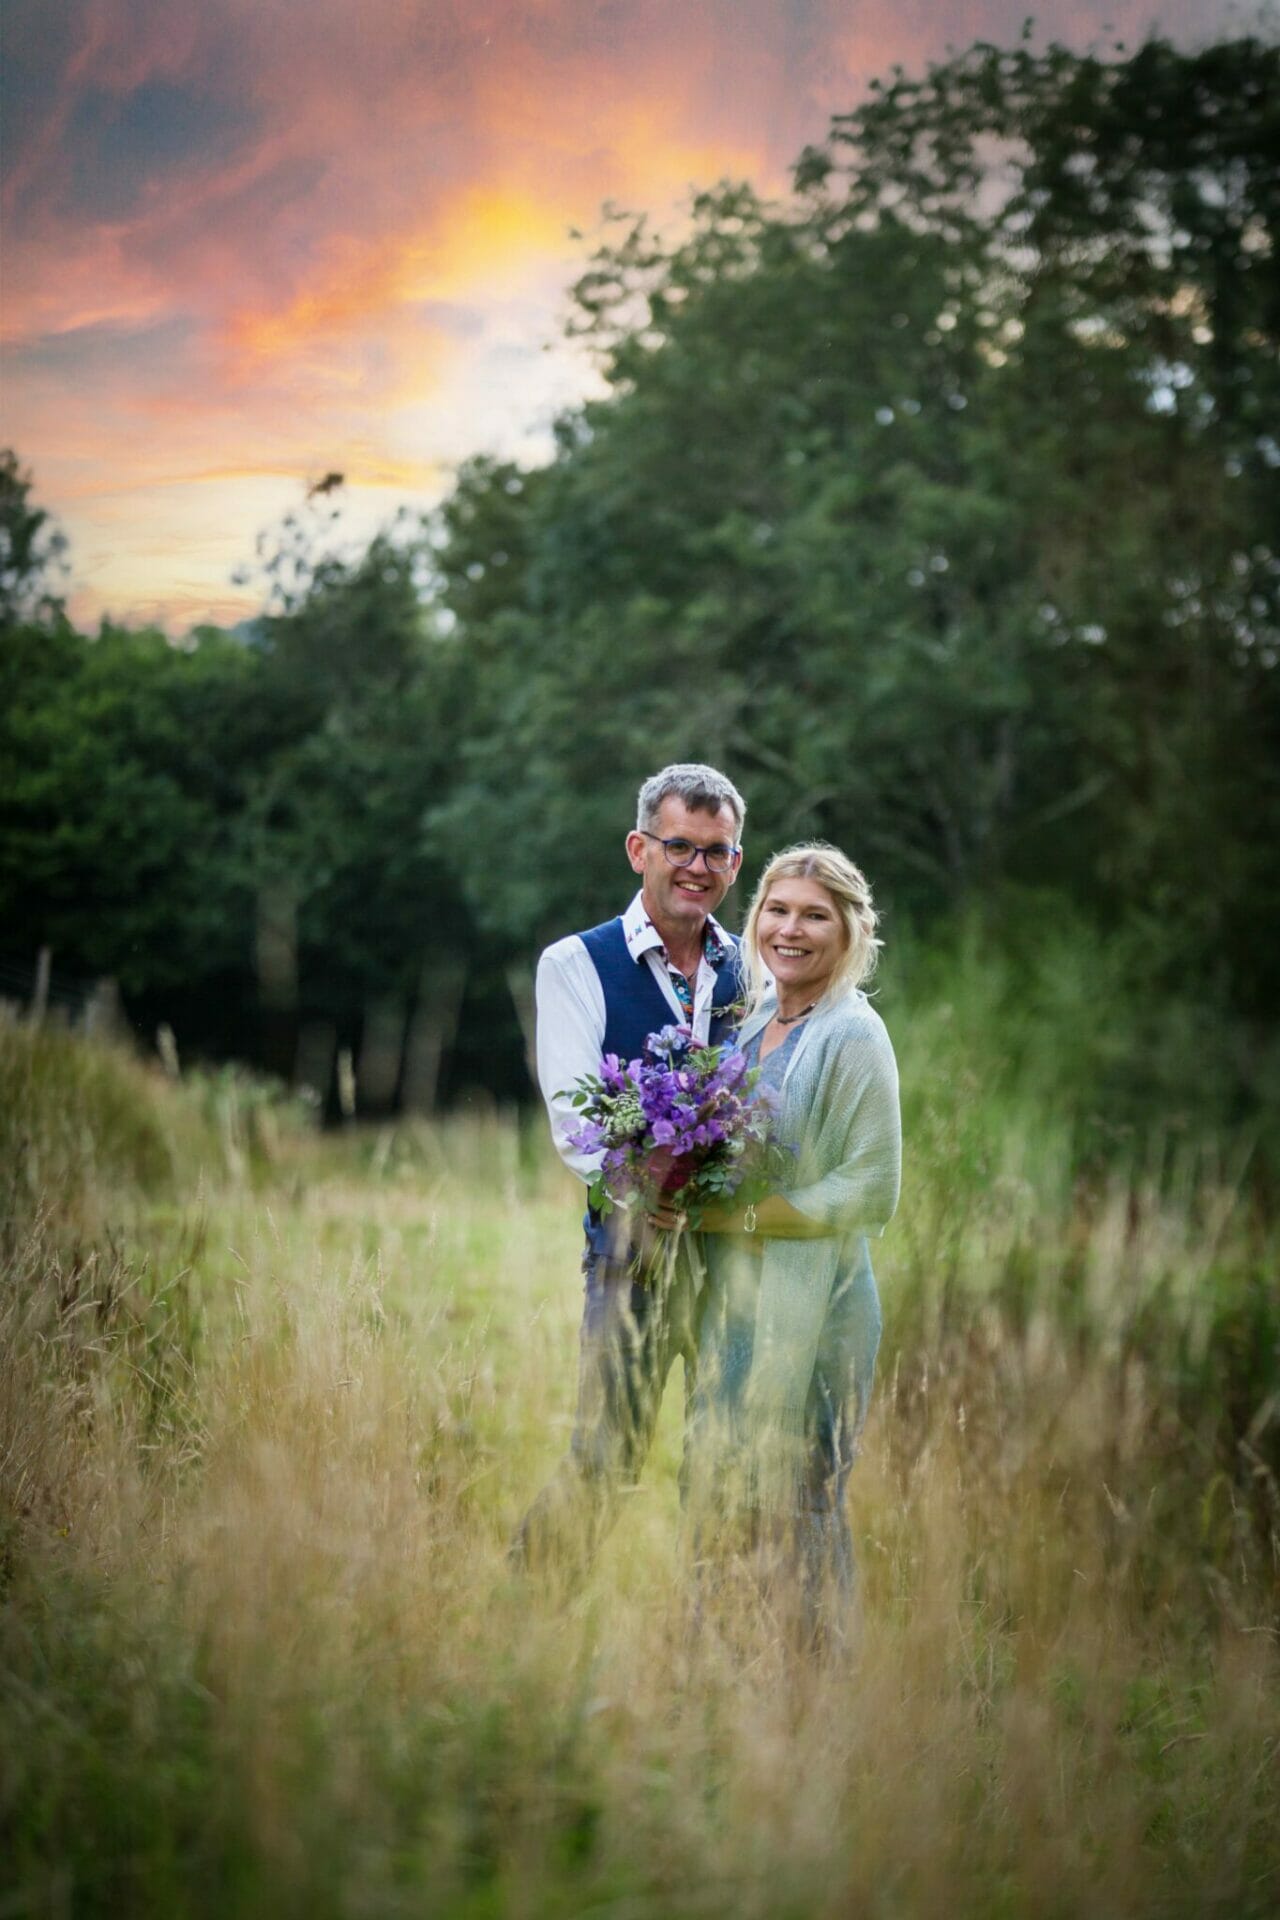 Image of a wedding couple at Sunset taken at Hope Farm in Bridport by Somerset Wedding Photographer, Victoria Welton